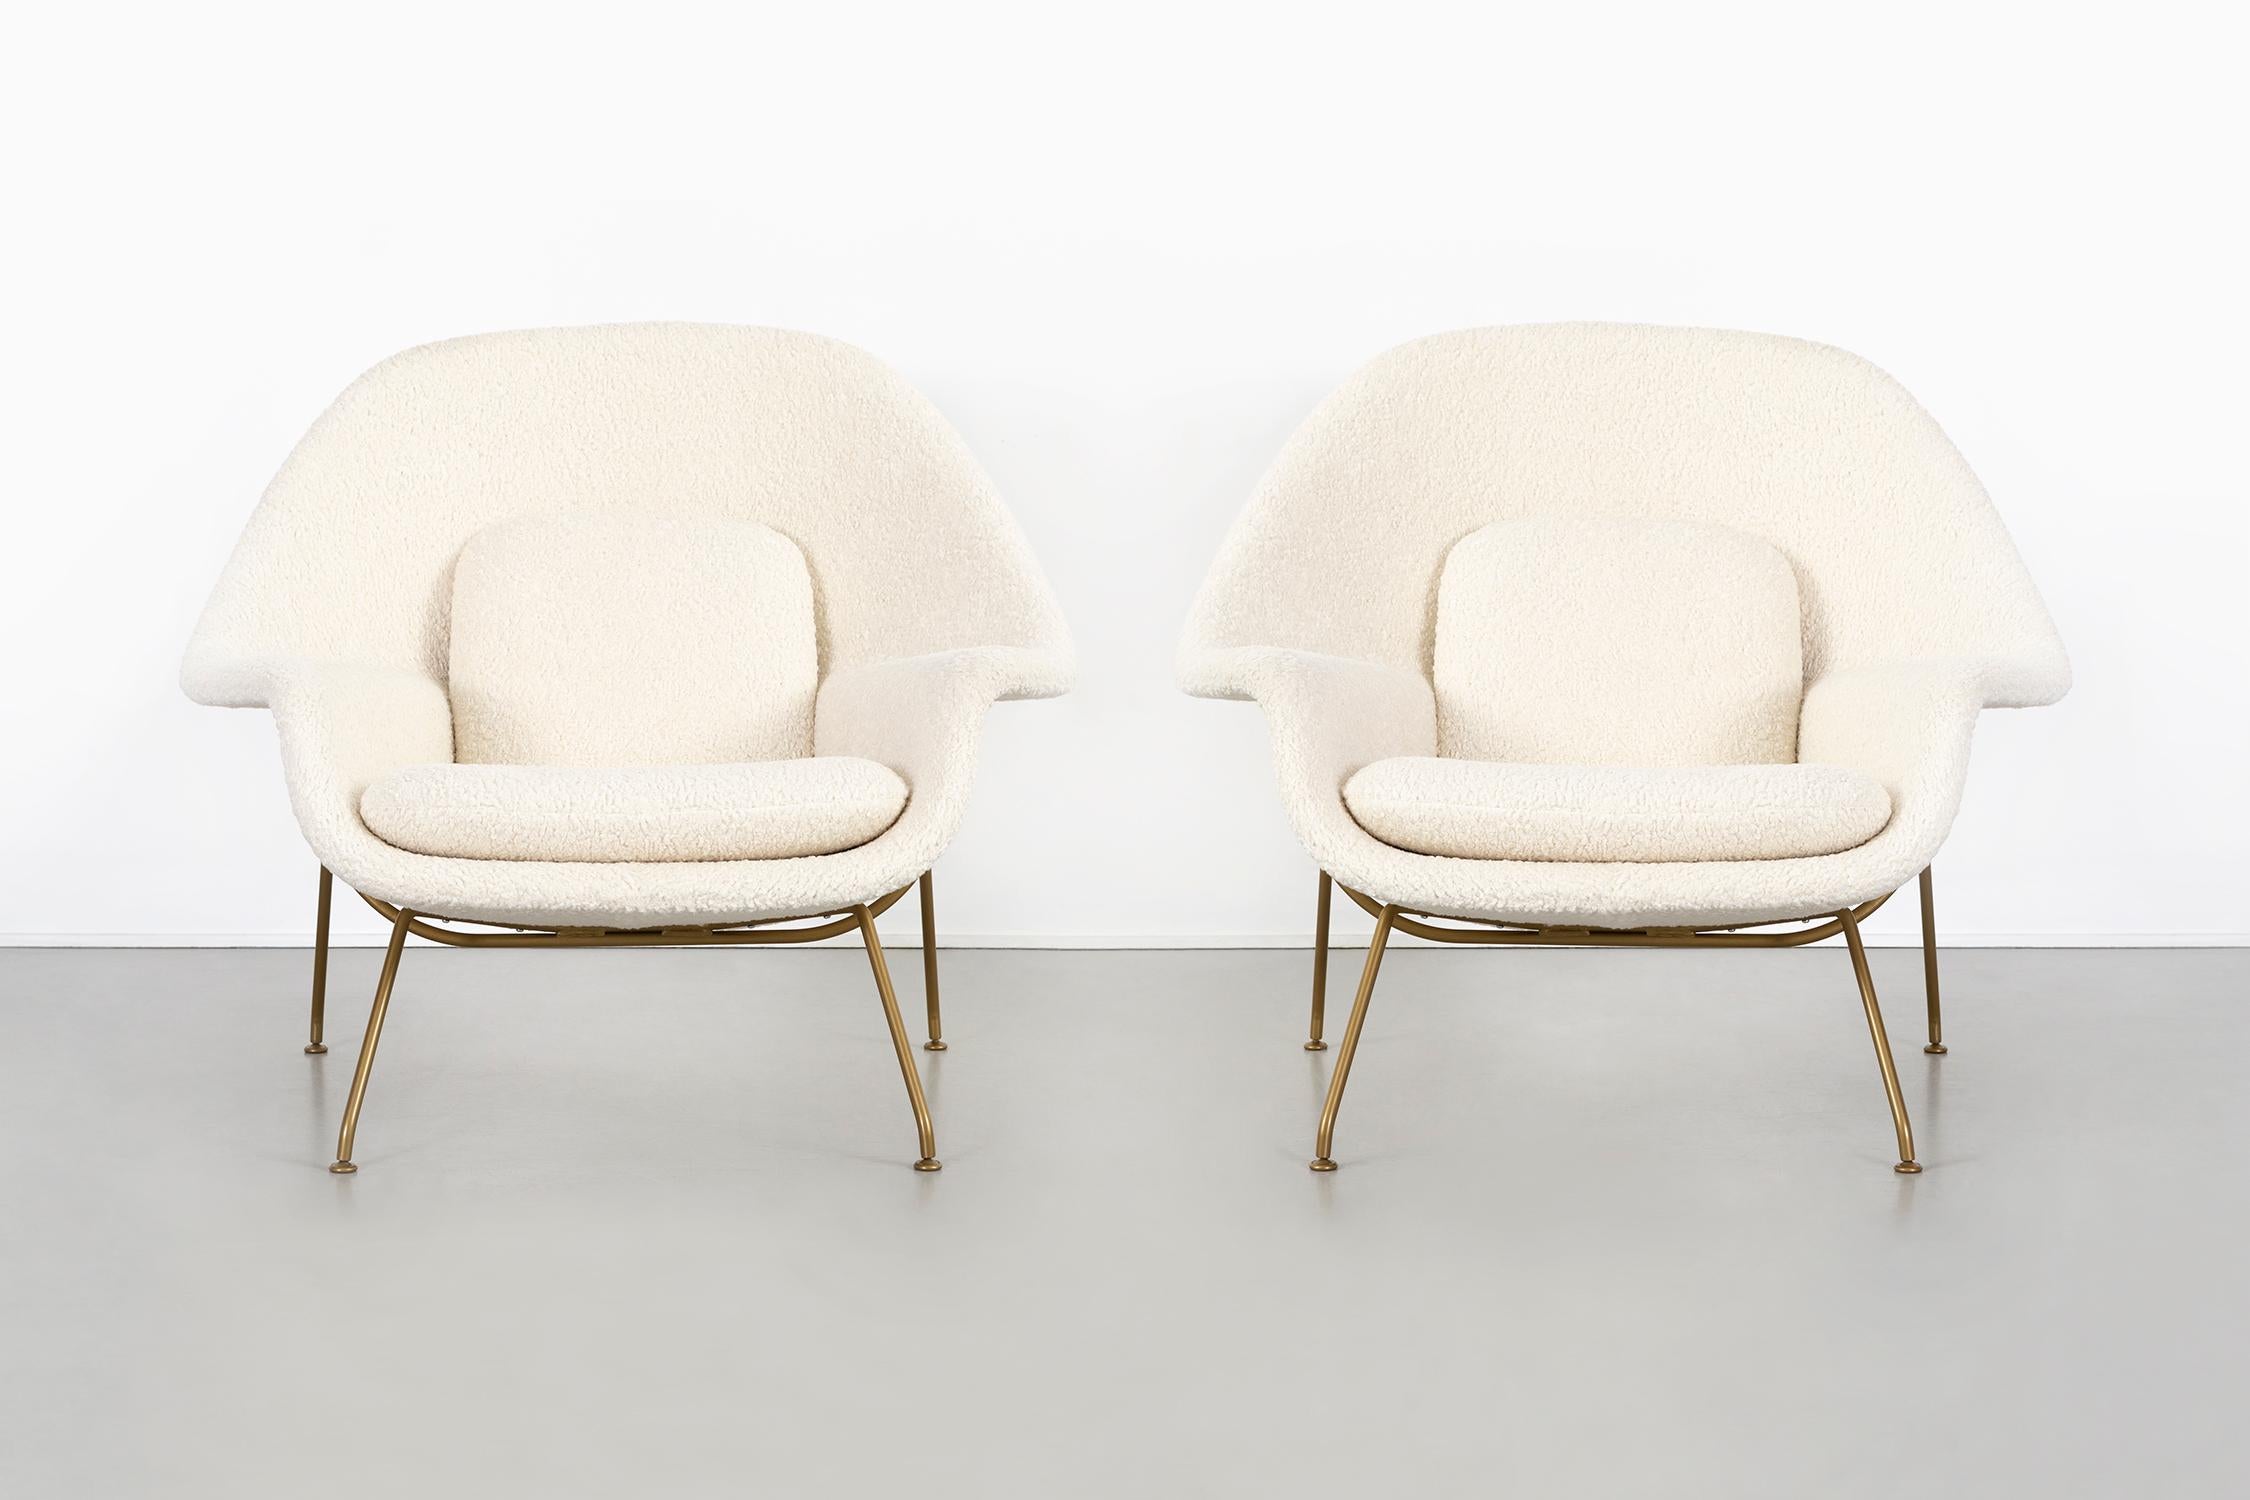 Set of womb chairs

Designed by Eero Saarinen for Knoll

USA, d 1948 / circa 1960s

Reupholstered in synthetic poly 100,000 double rubs fabric and freshly powder coated bases in a brass finish 

Measures: 35 ½